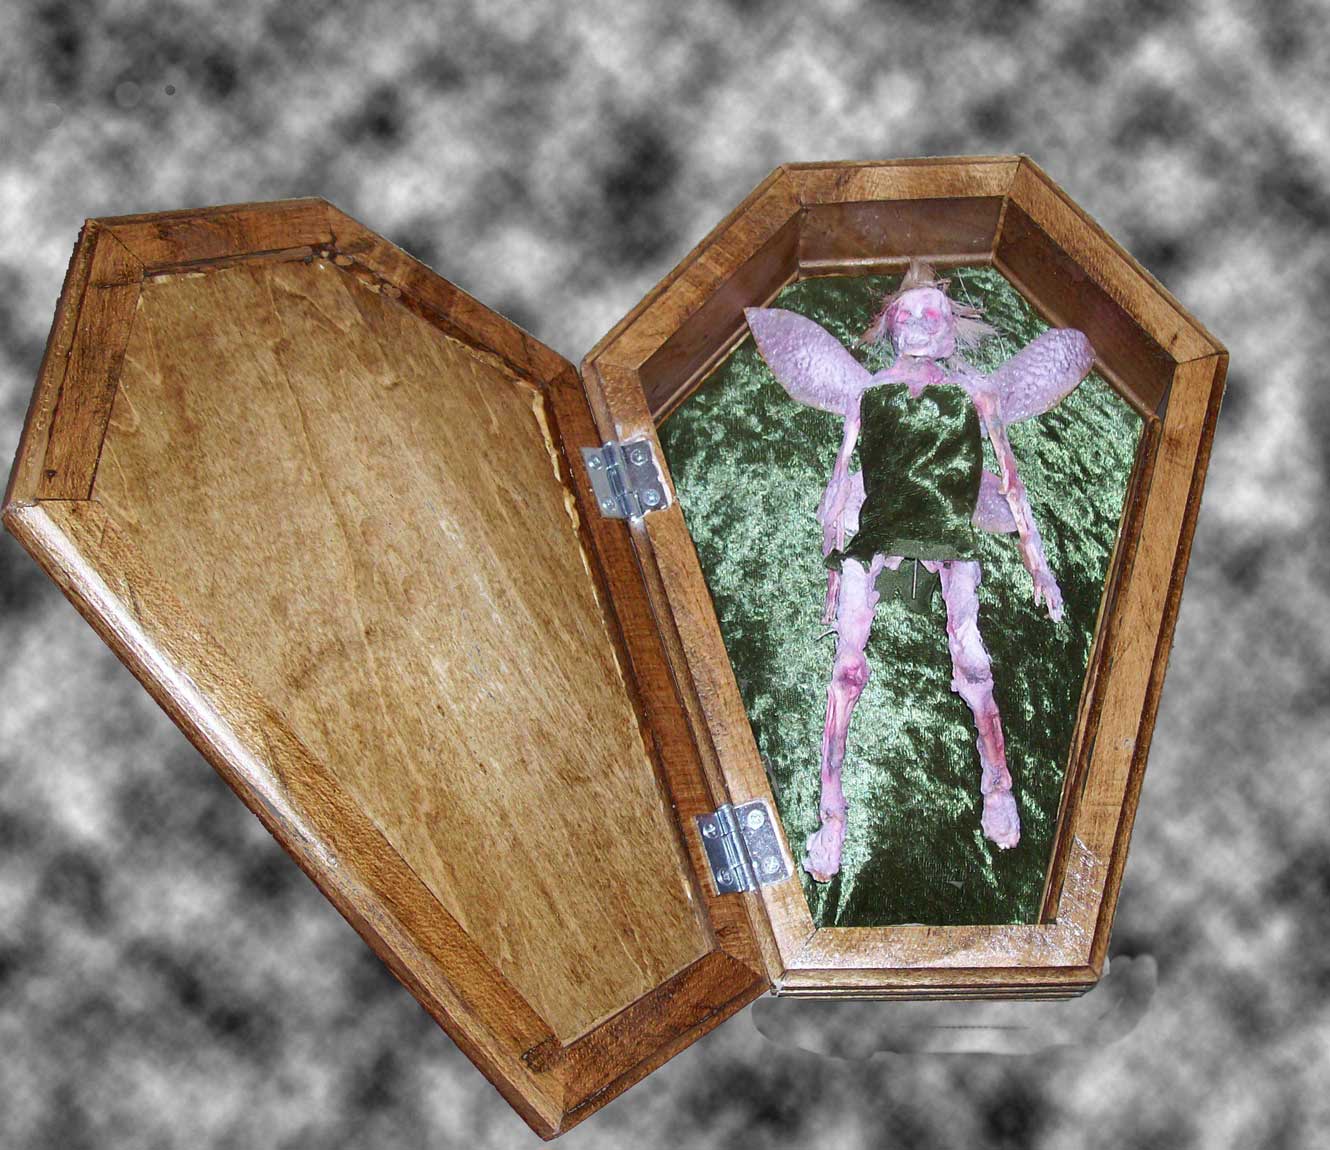 Tinker Dead fairy corpse and coffin